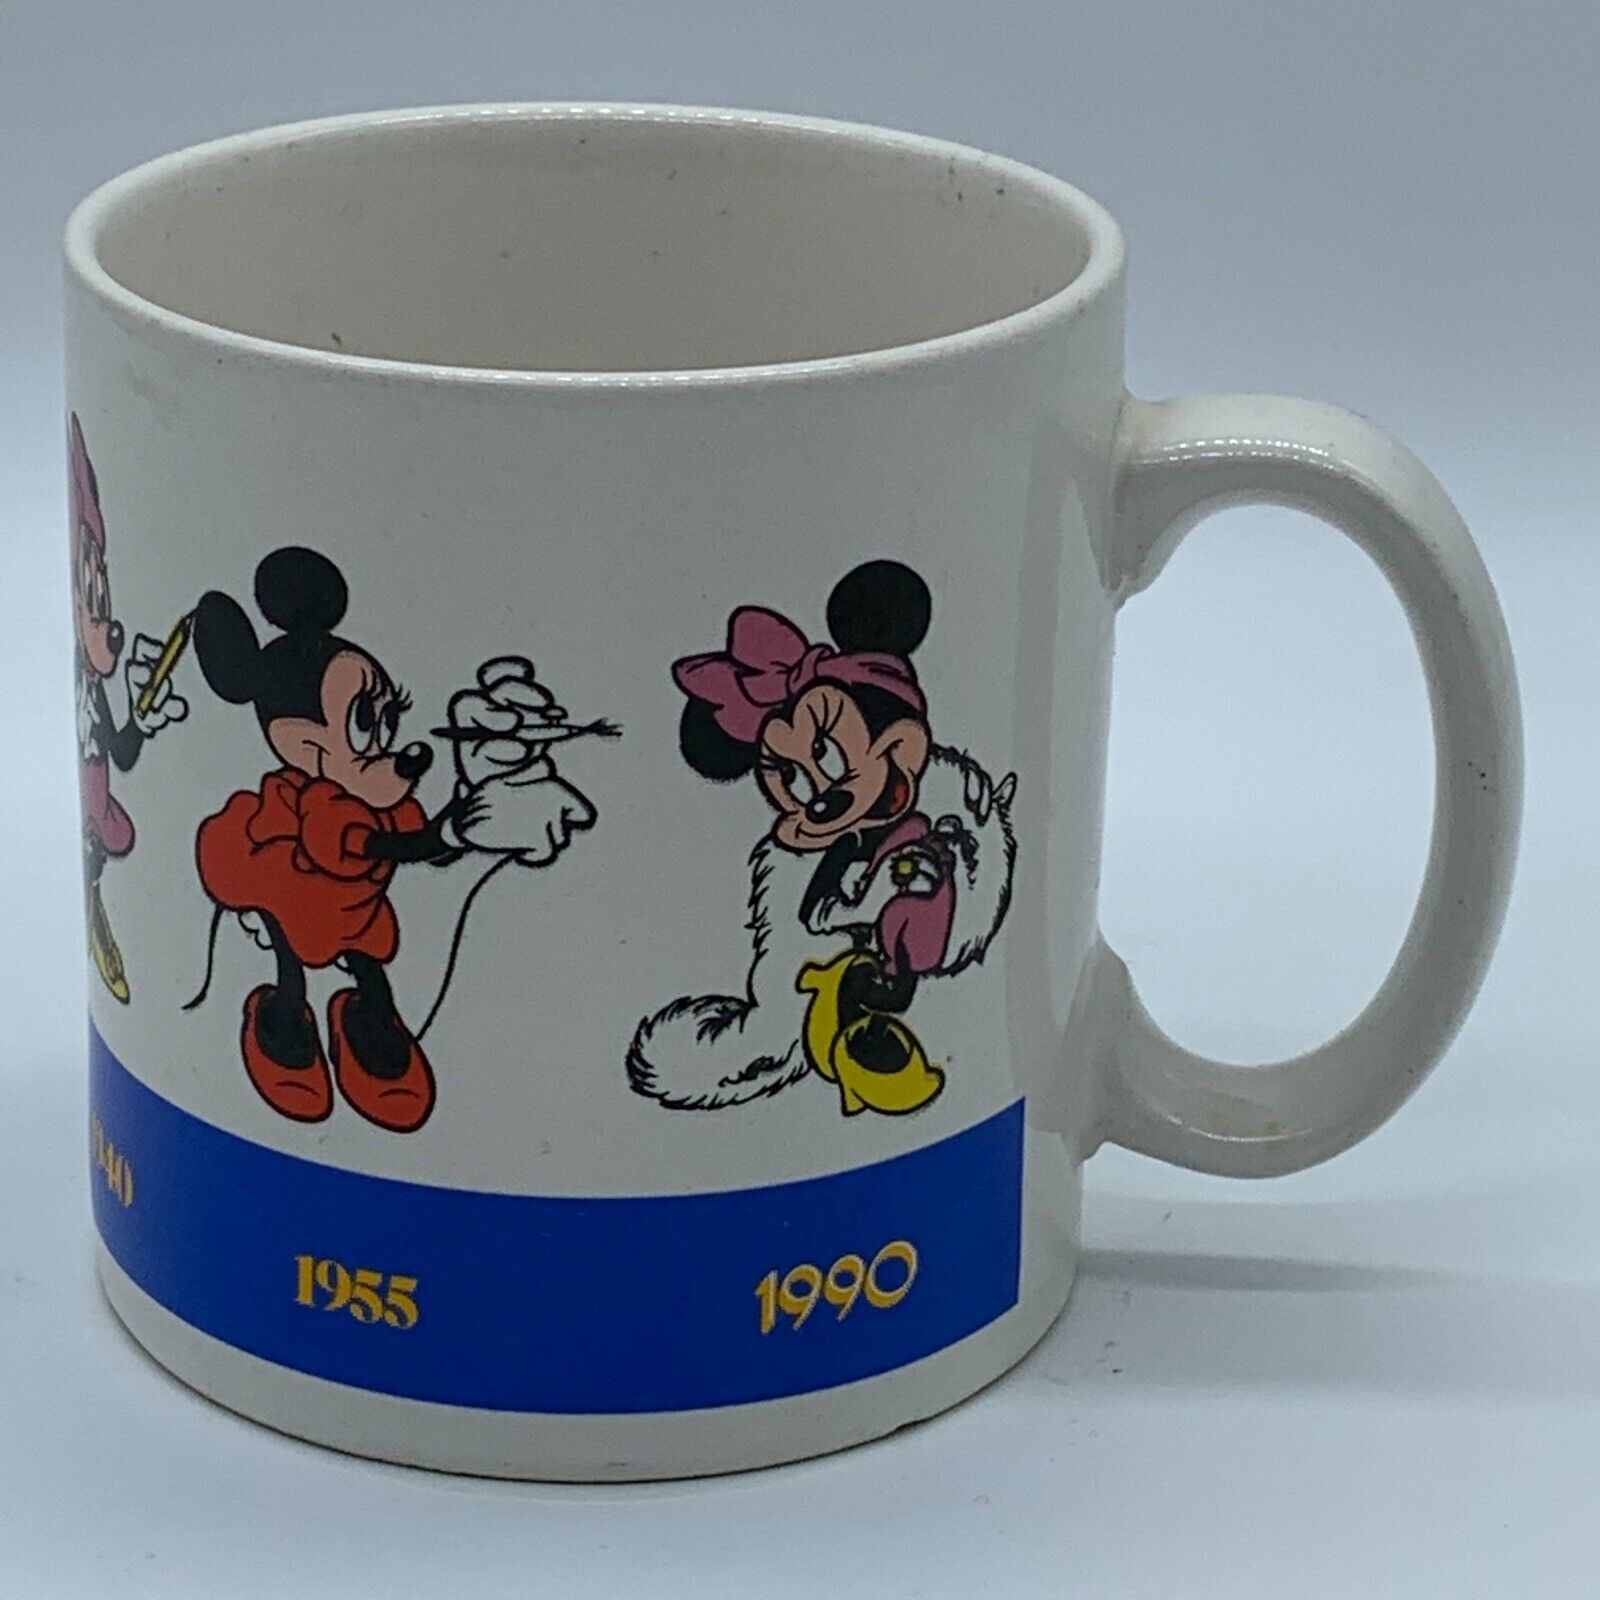 Vintage Minnie Mouse Coffee Mug Through The Years 1928 to 1990